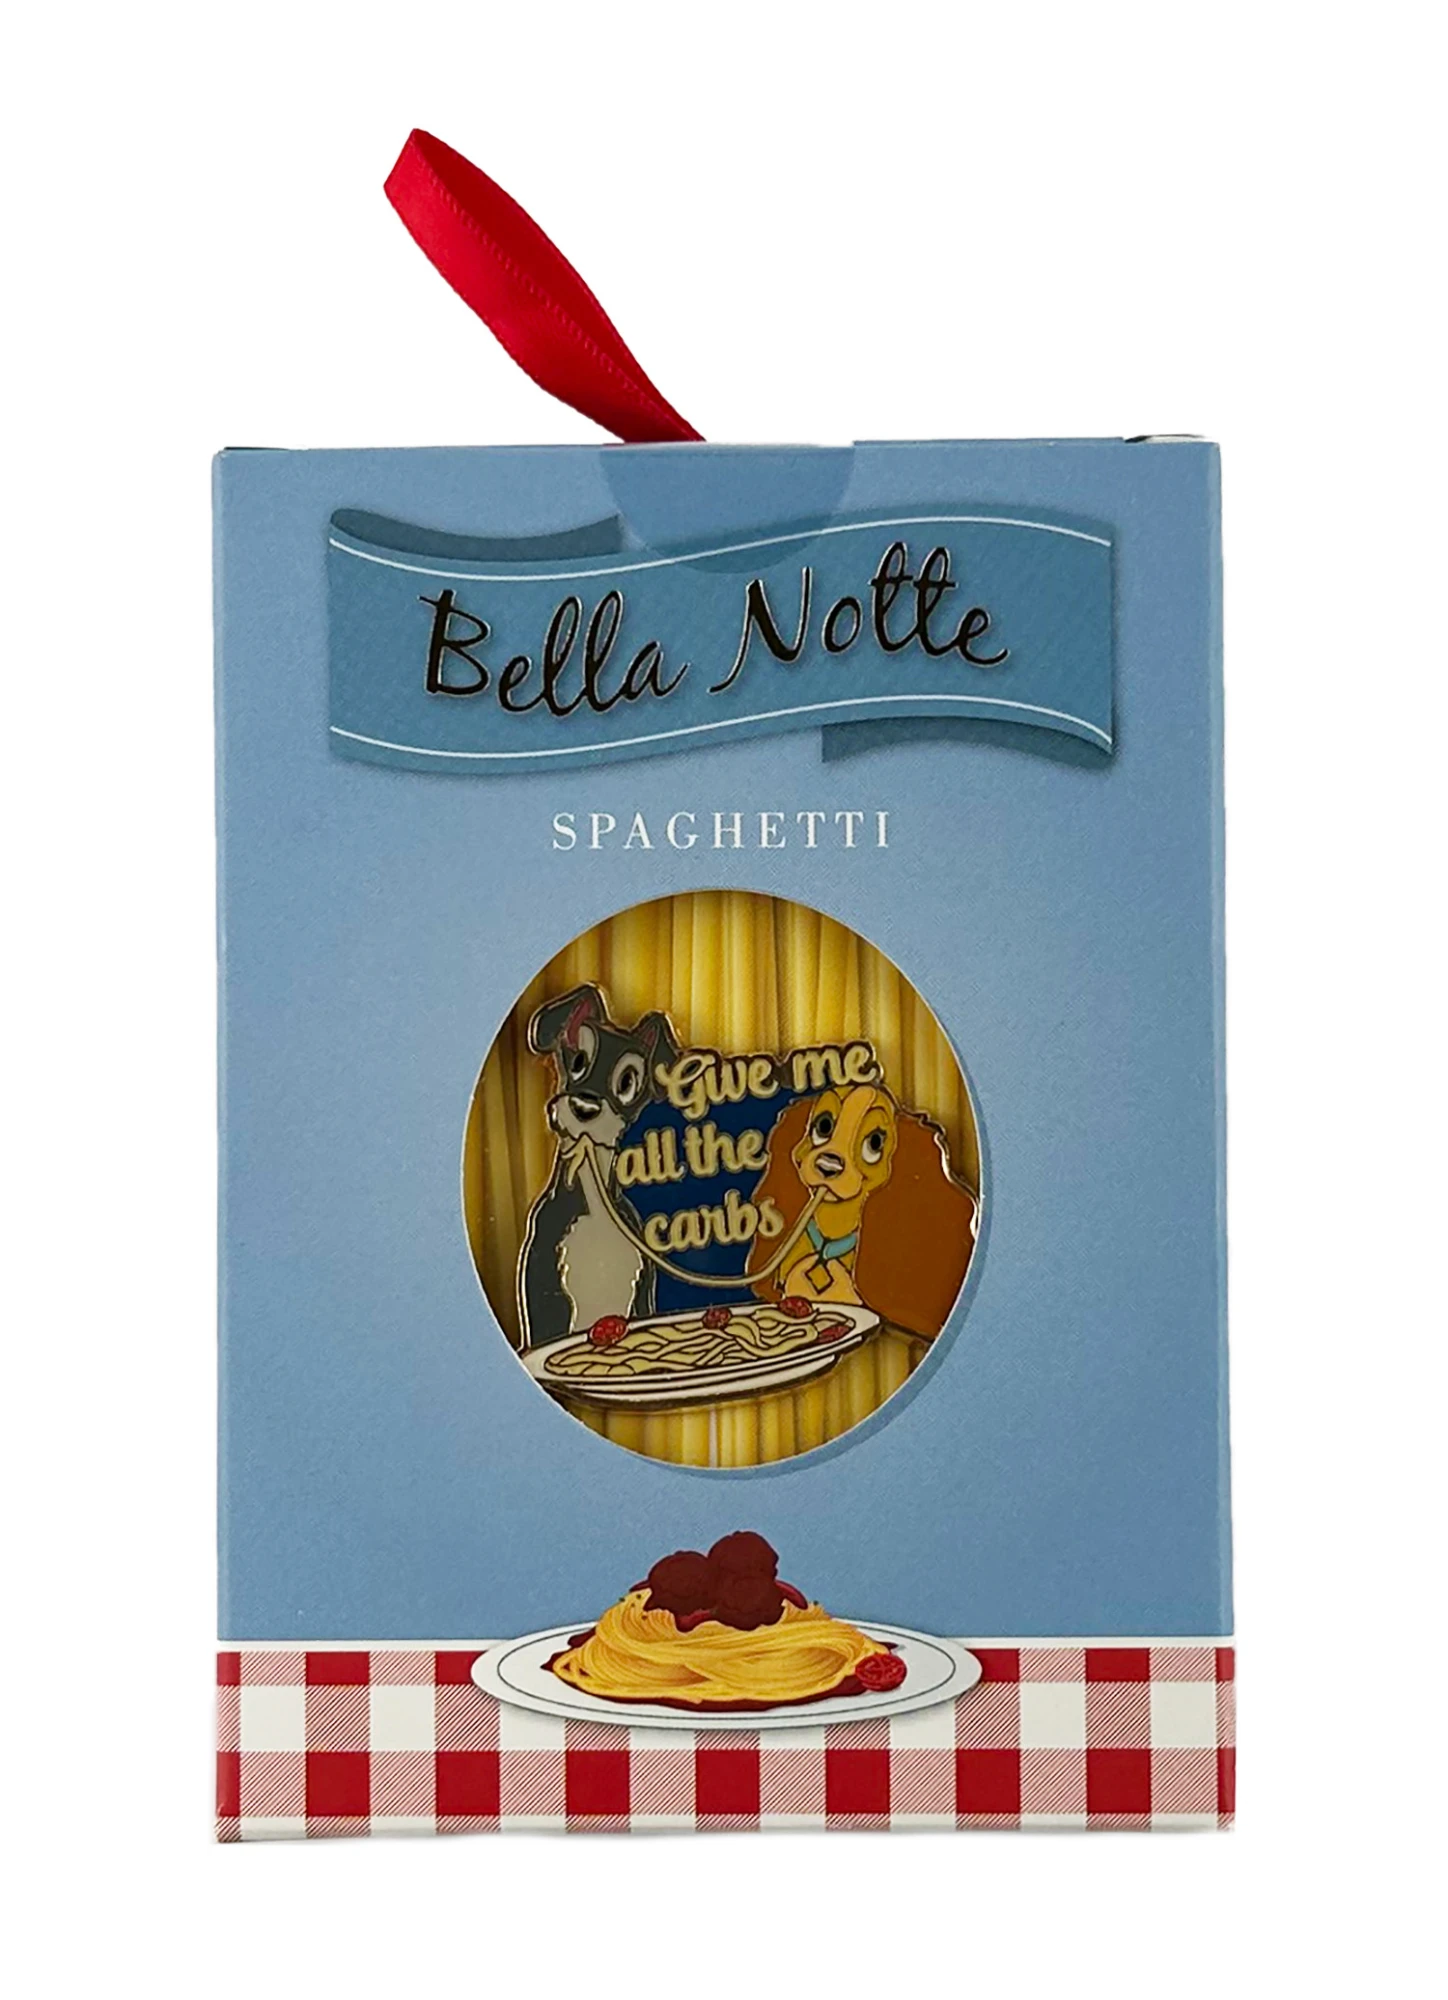 item Disney Pin - Lady and the Tramp - Bella Notte - Holiday Gifting - Ornament IMG_2384